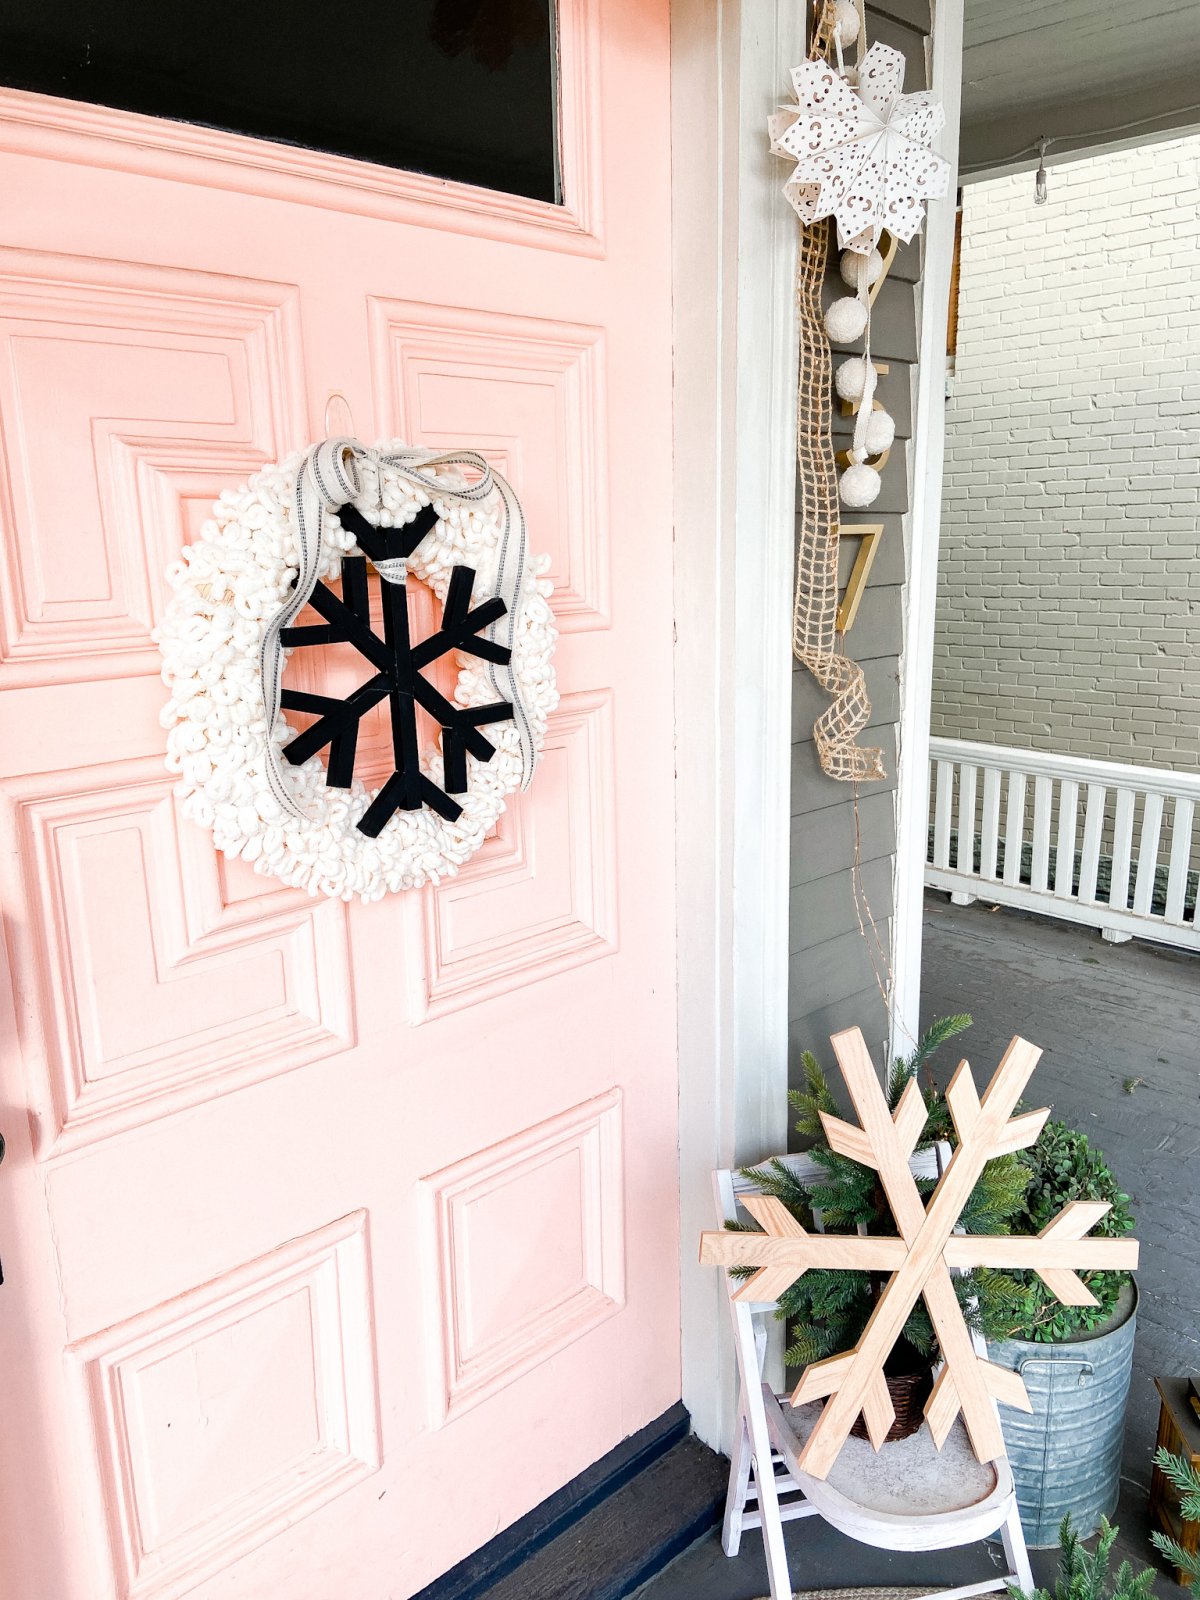 DIY Winter Wood and Yarn Snowflake Wreath. Celebrate winter with an easy yarn-wrapped wreath featuring a handmade giant snowflake!